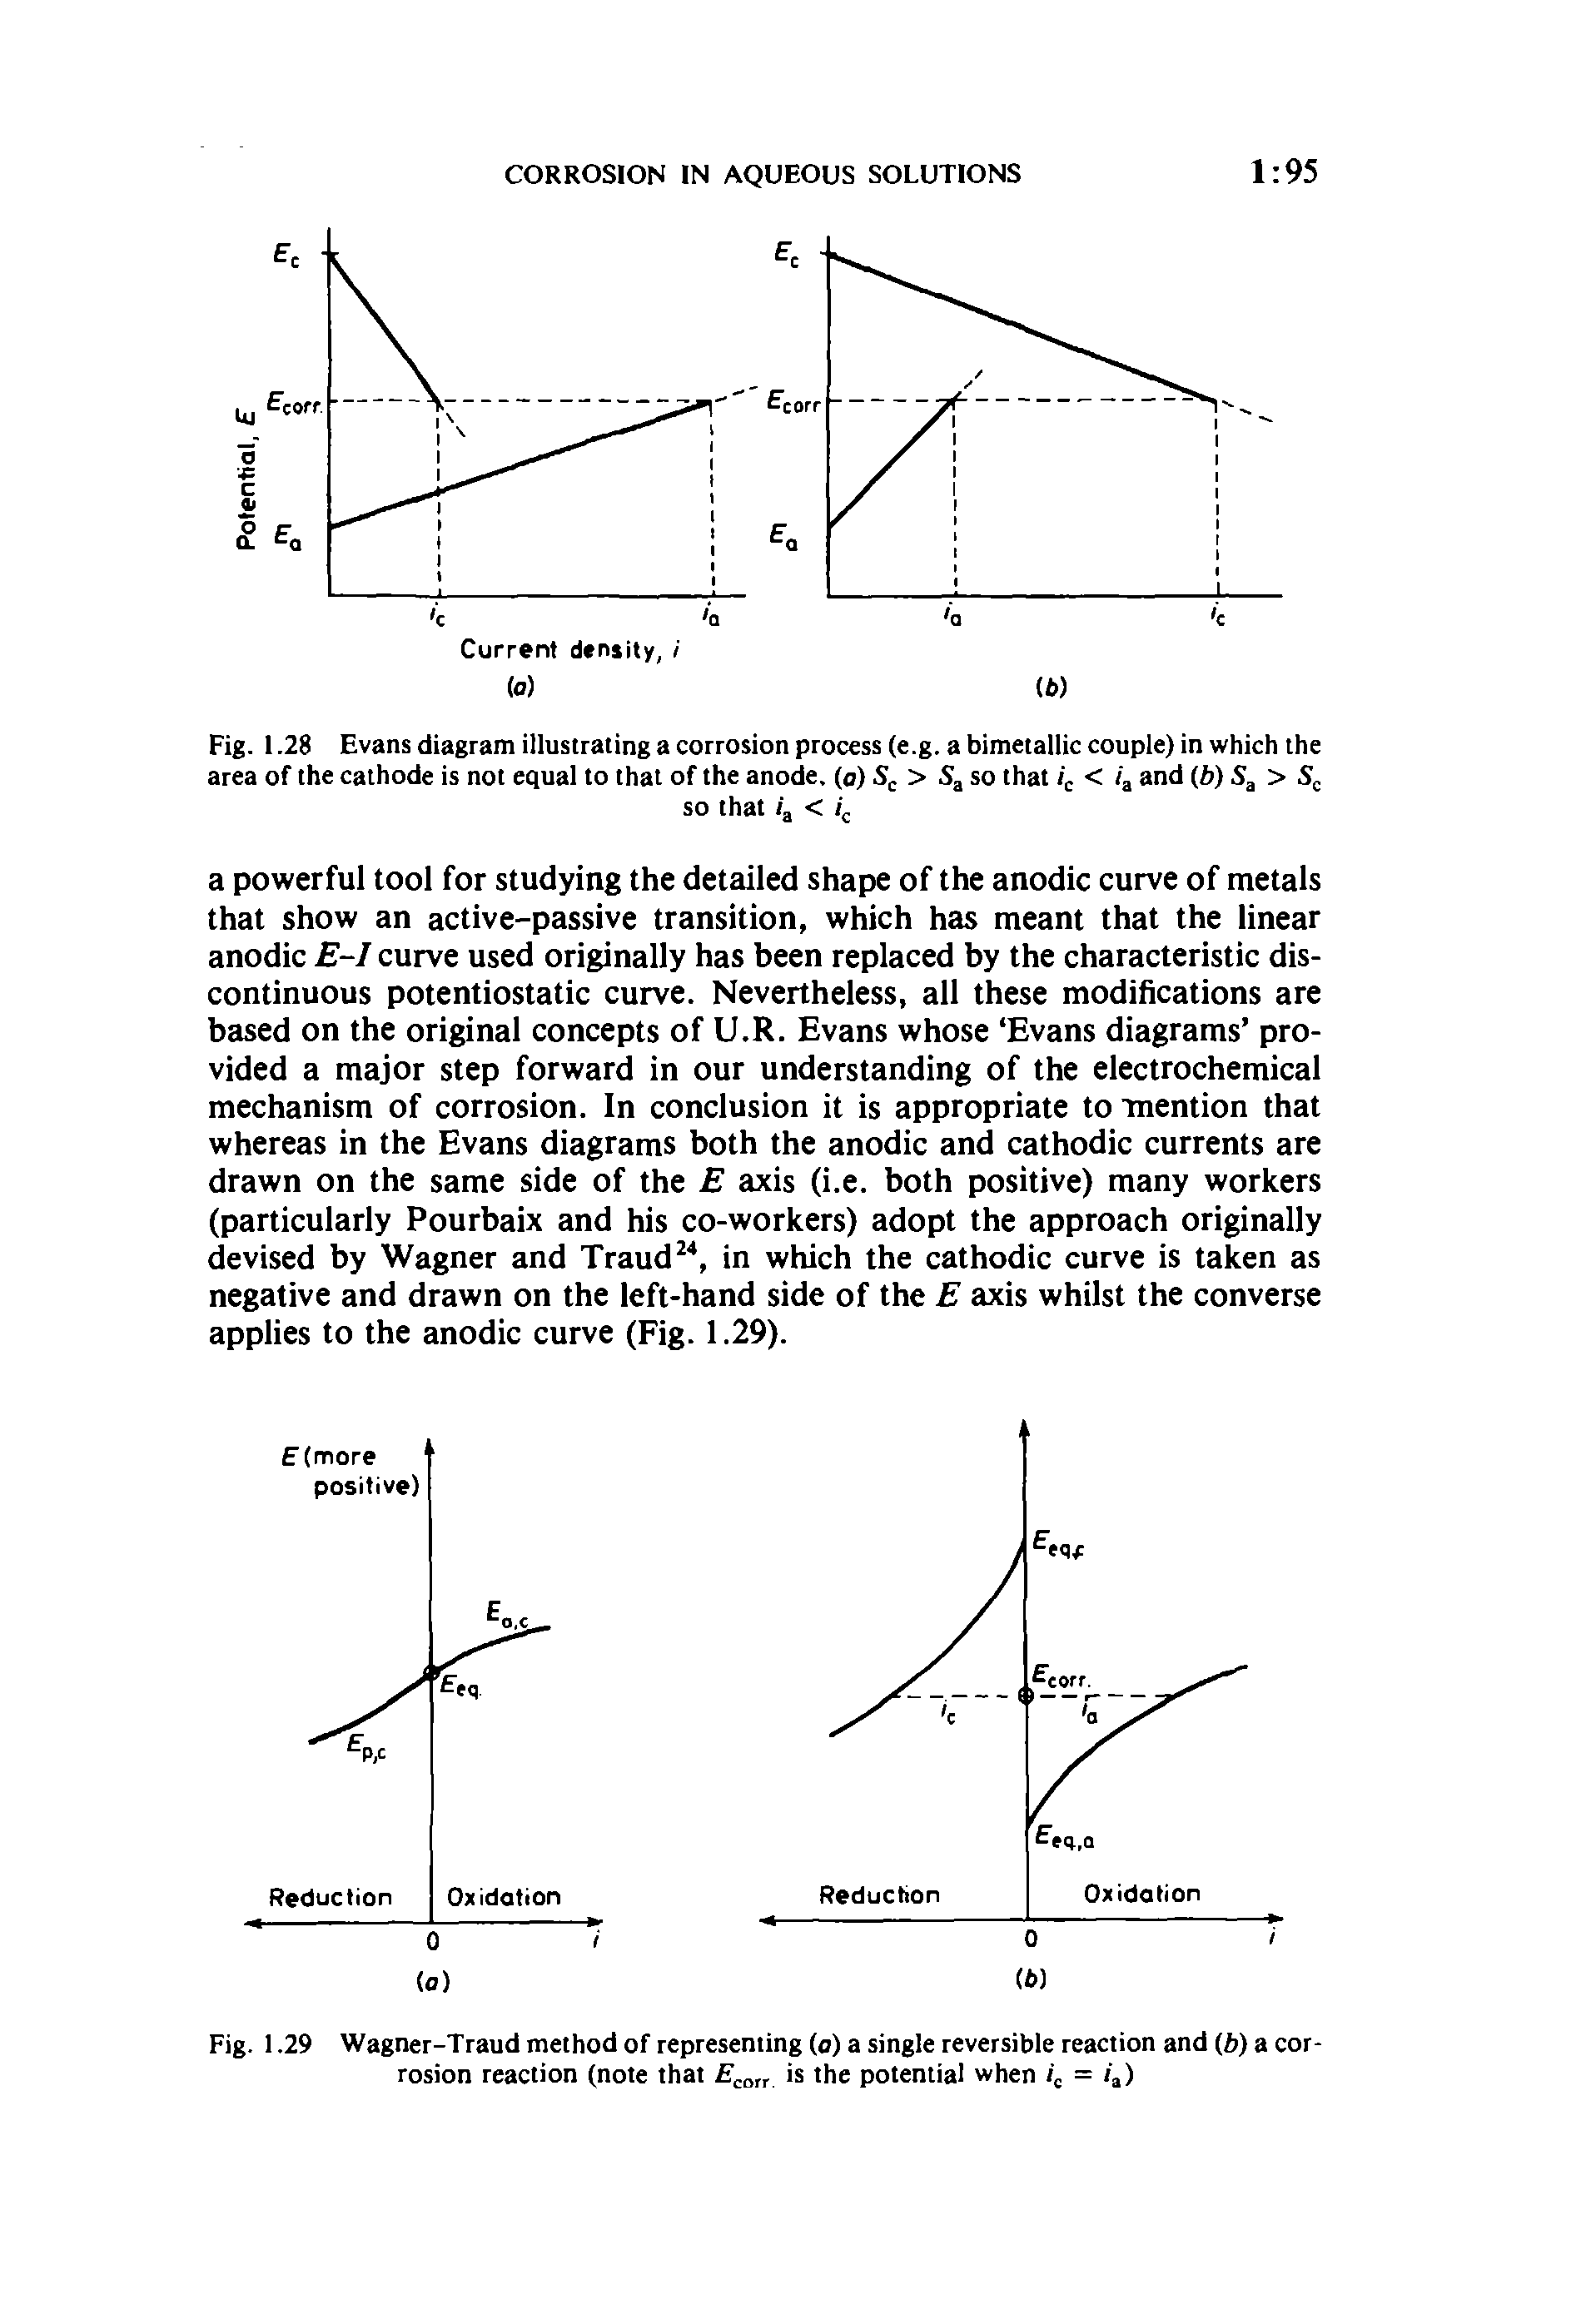 Fig. 1.29 Wagner-Traud method of representing (a) a single reversible reaction and (b) a corrosion reaction (note that E orr the potential when = 4)...